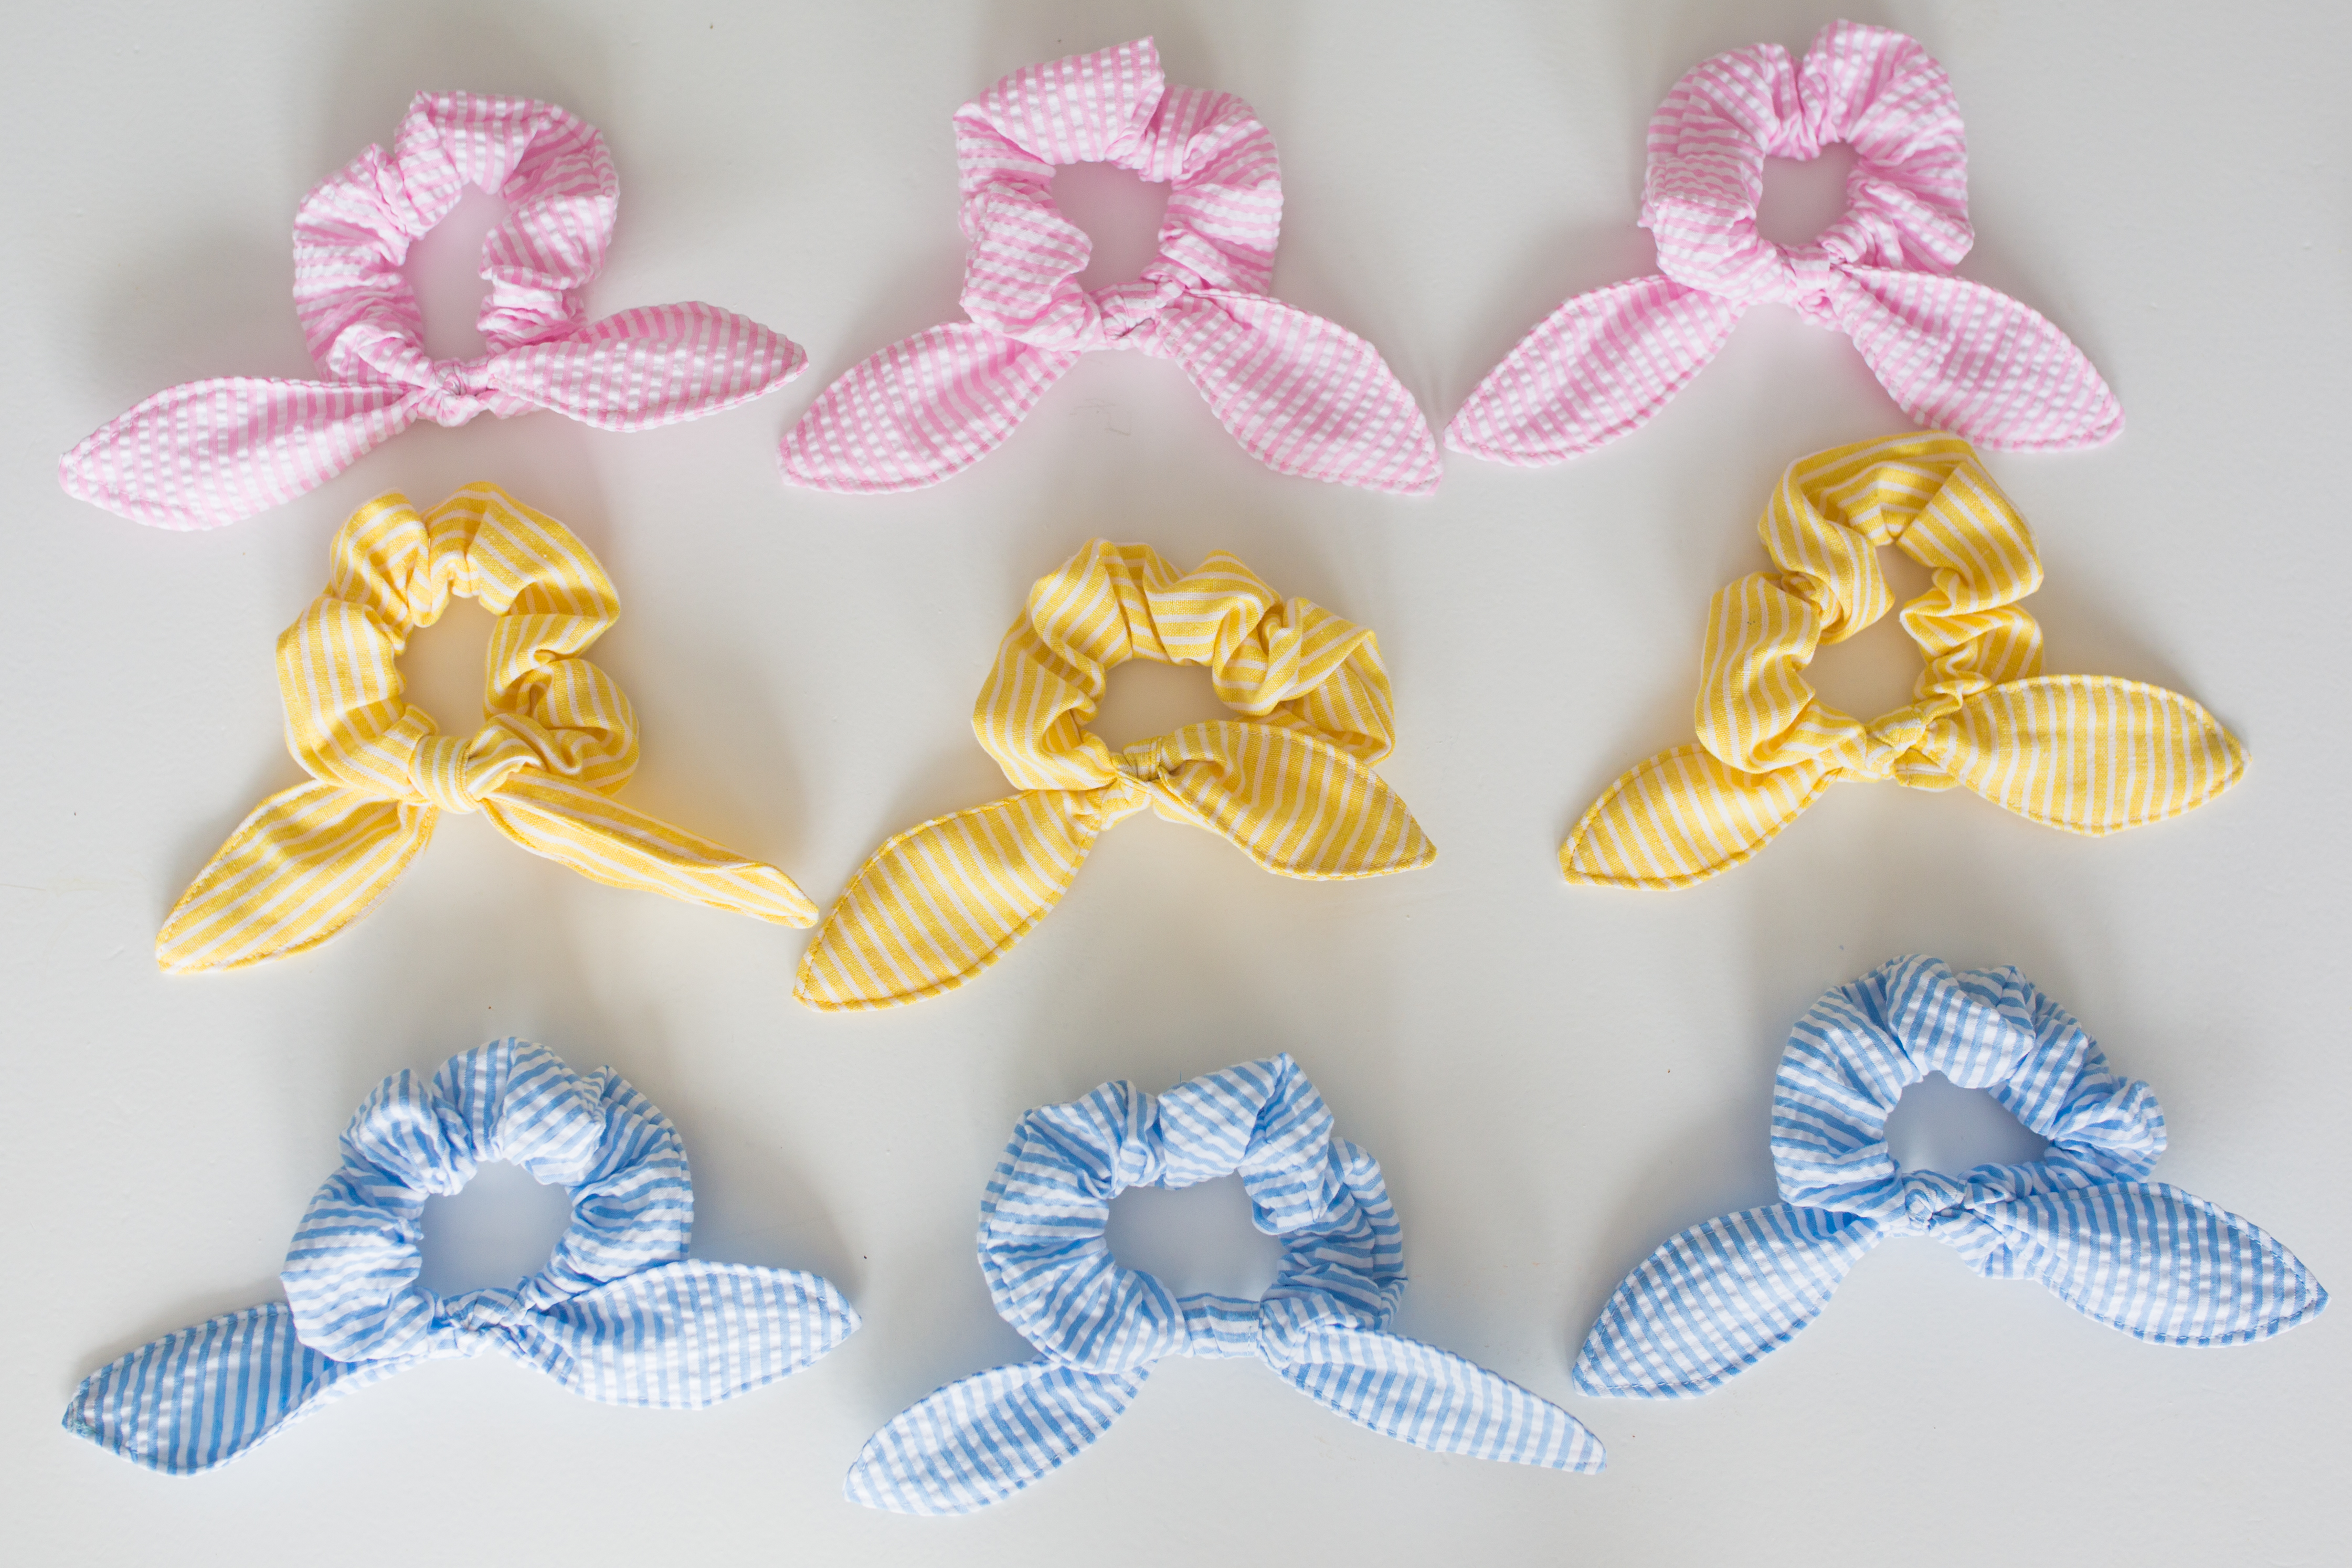 Introducing Sunshine Style Bow Hair Ties / Bow Hair Scrunchie / Hair Accessories / Coastal Style / How to Wear a Scrunchie / Handmade Srunchie - Sunshine Style, a Florida Fashion, Lifestyle and Travel Blog by Katie